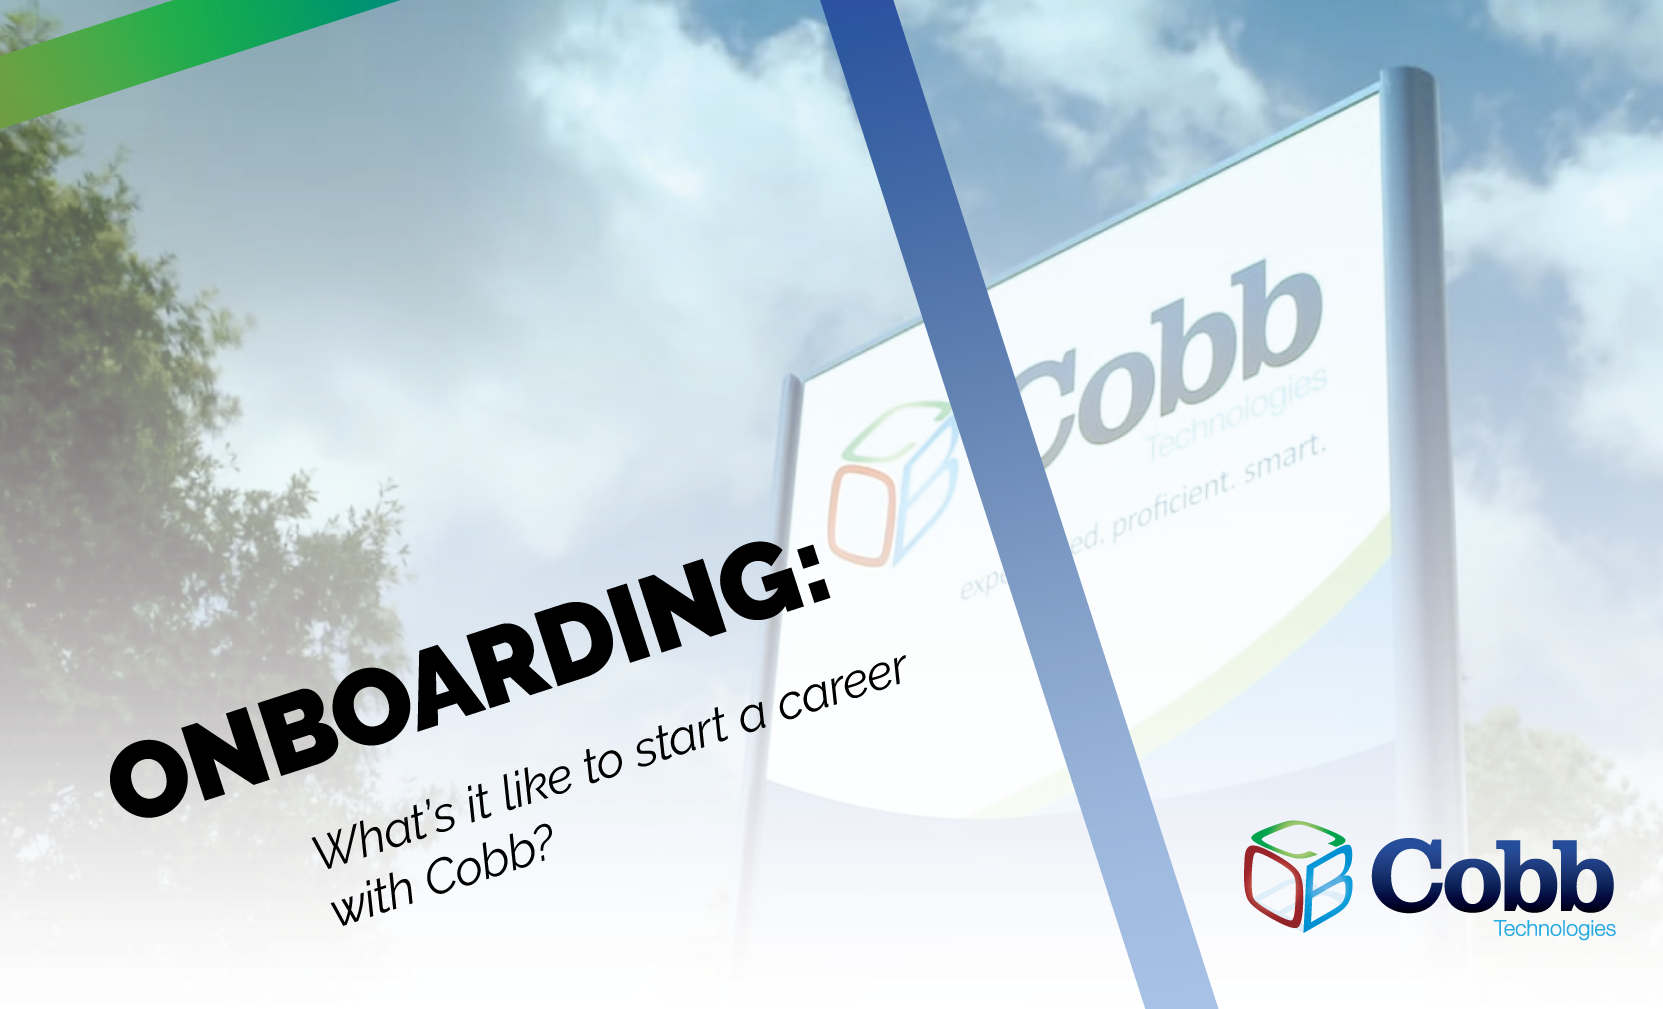 Onboarding with Cobb - Evan's Experience